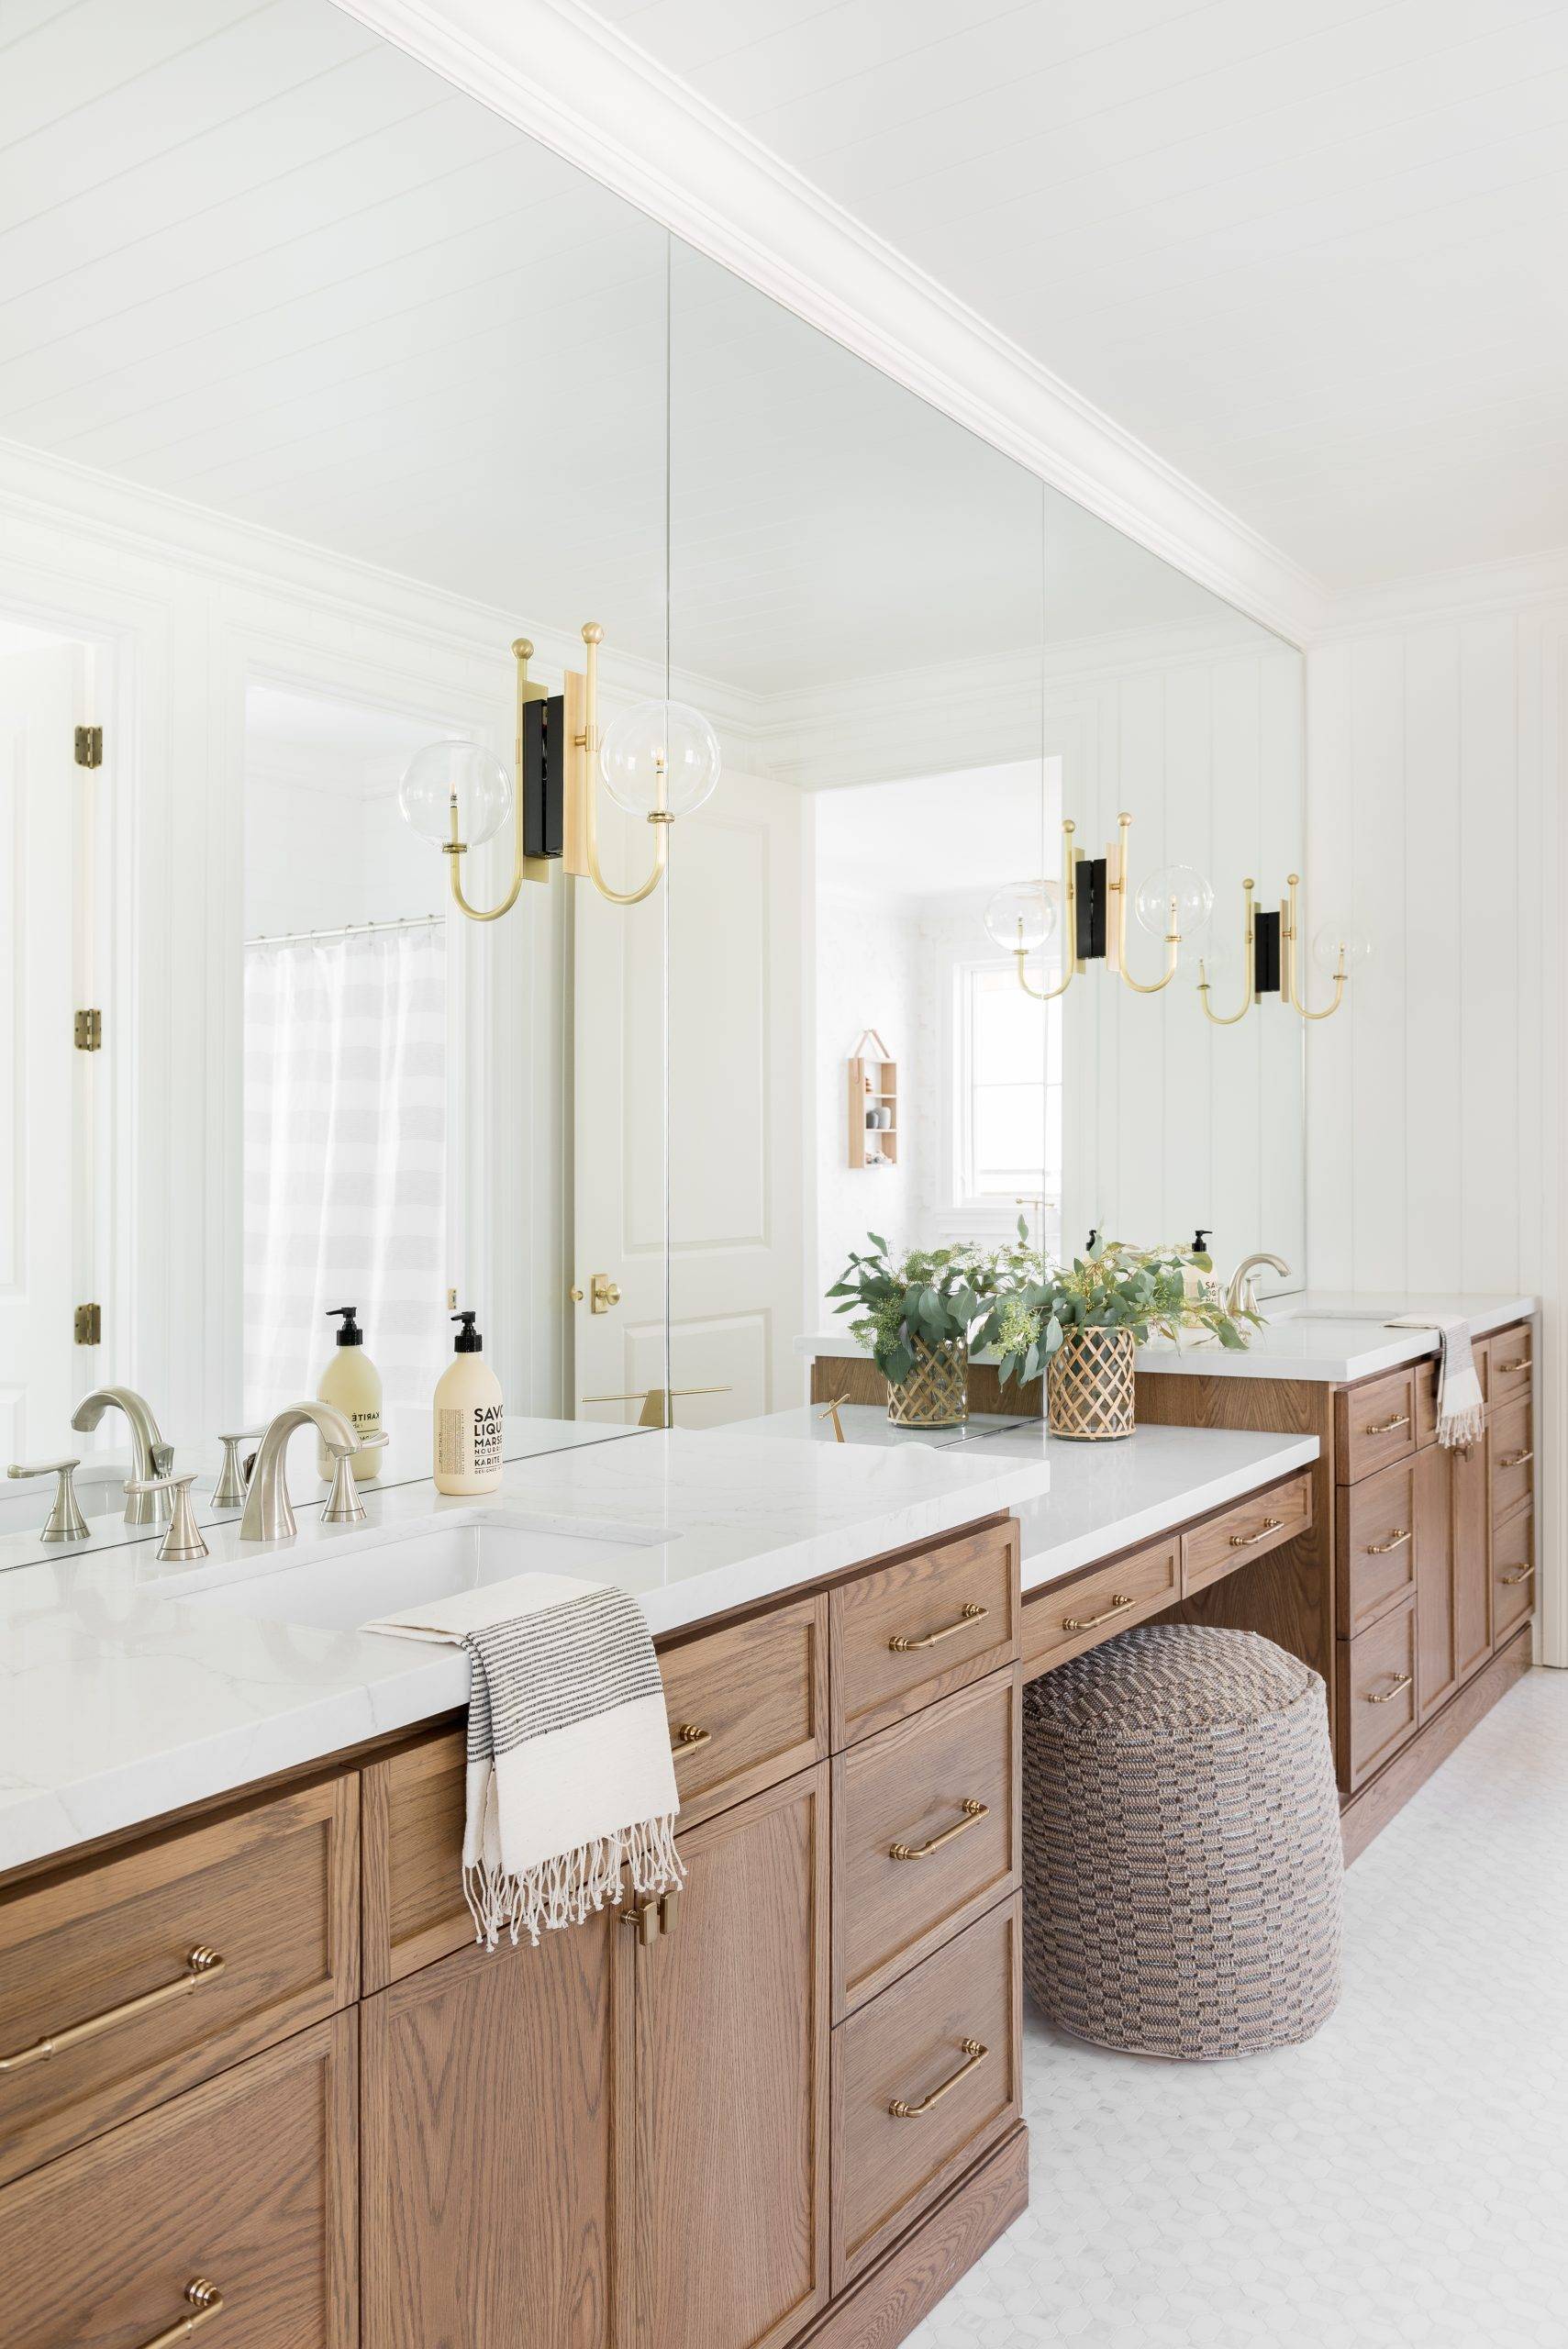 Warm Jack and Jill bathroom with spacious vanity (from Studio McGee)